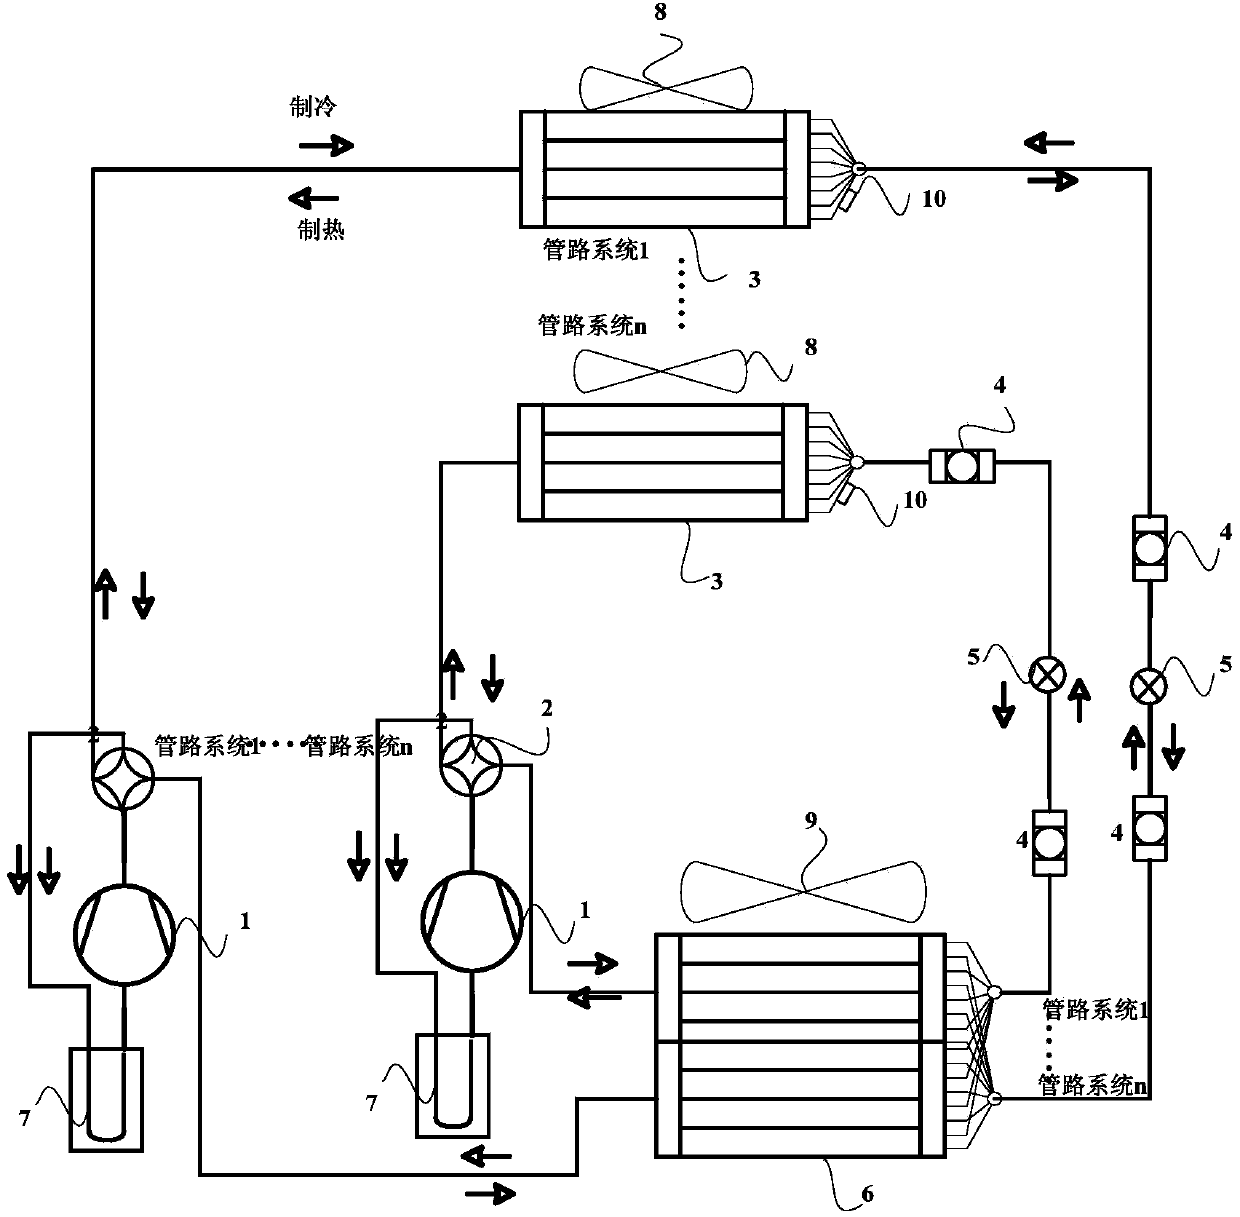 Defrosting control method and system of heat pump air-conditioning unit